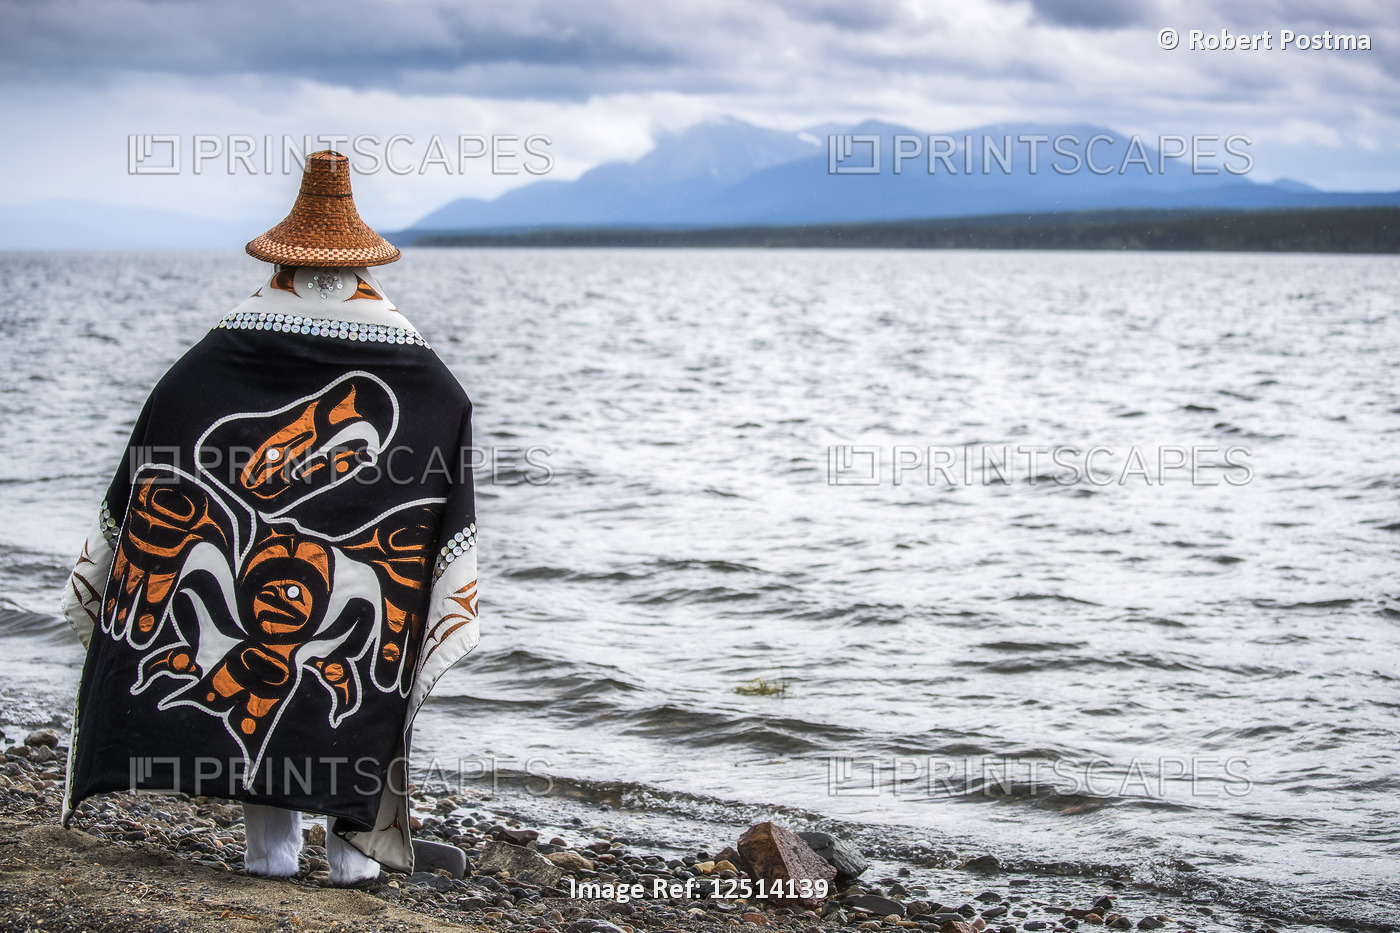 Tlingit first nation woman in traditional wardrobe on the shores of Teslin ...